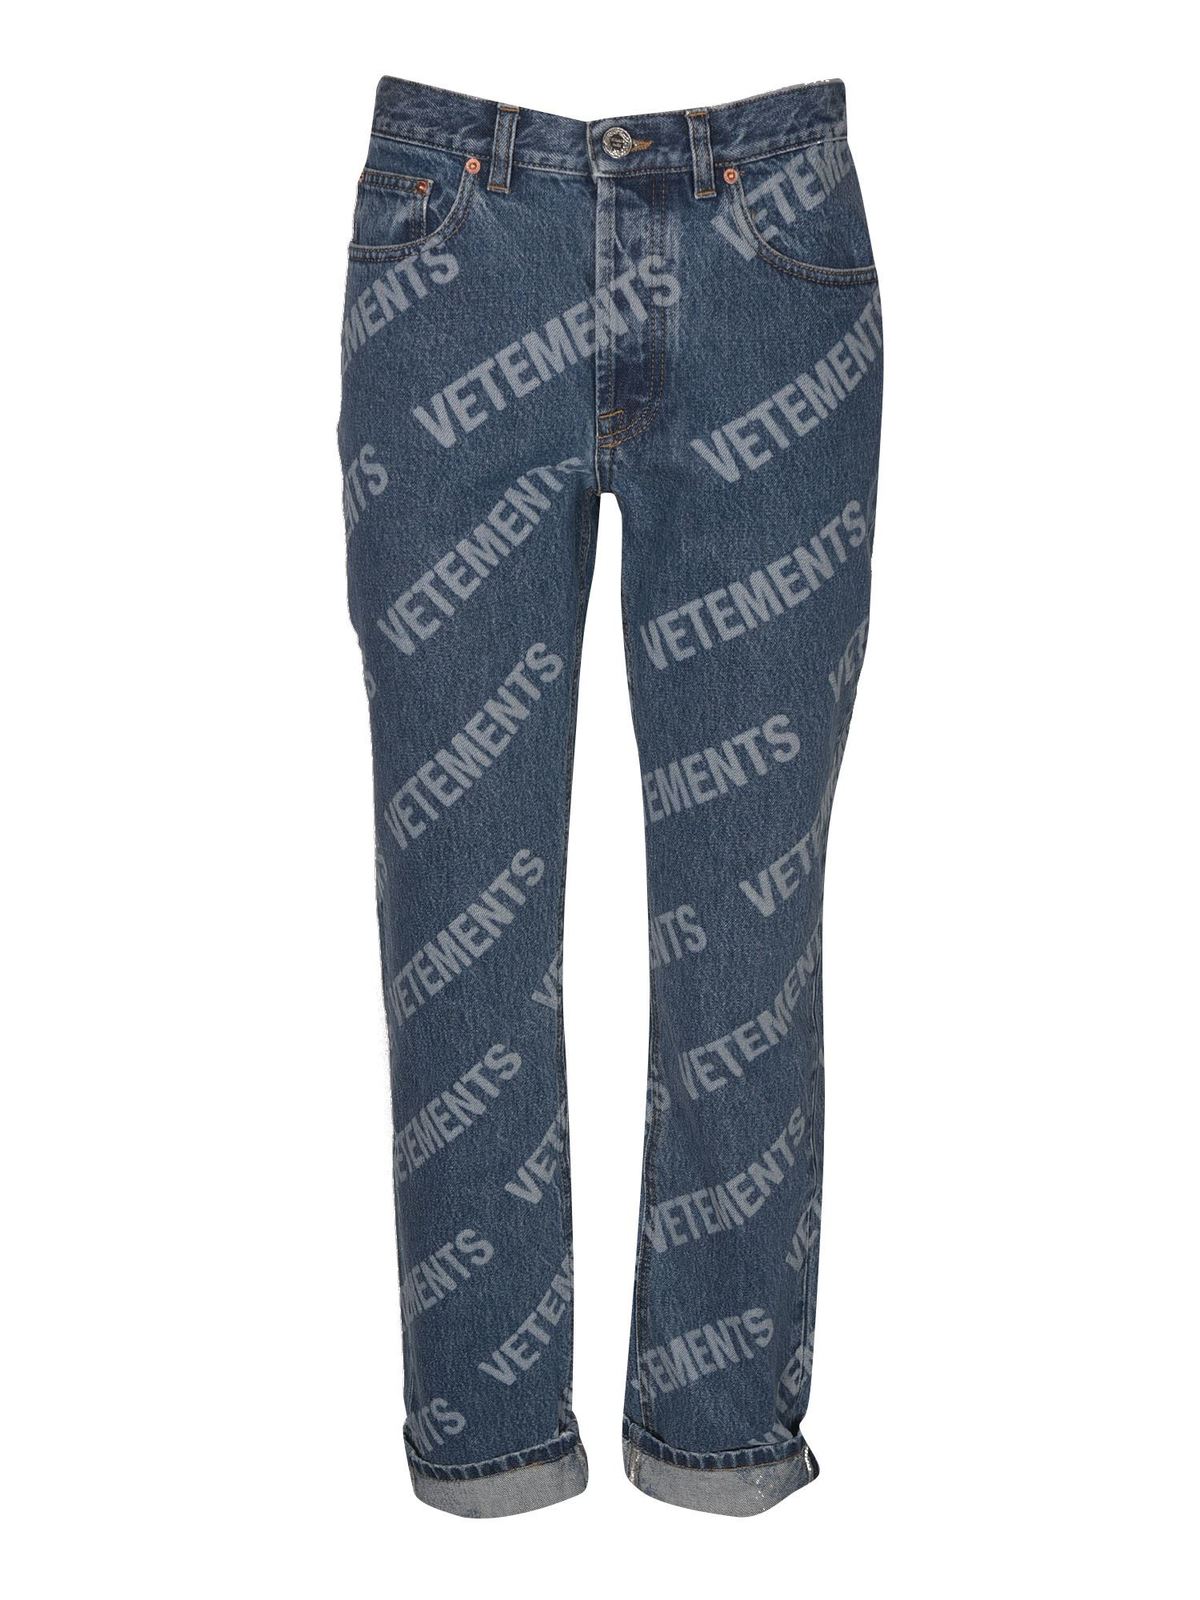 Straight leg jeans Vetements - All-over logo jeans in blue ...